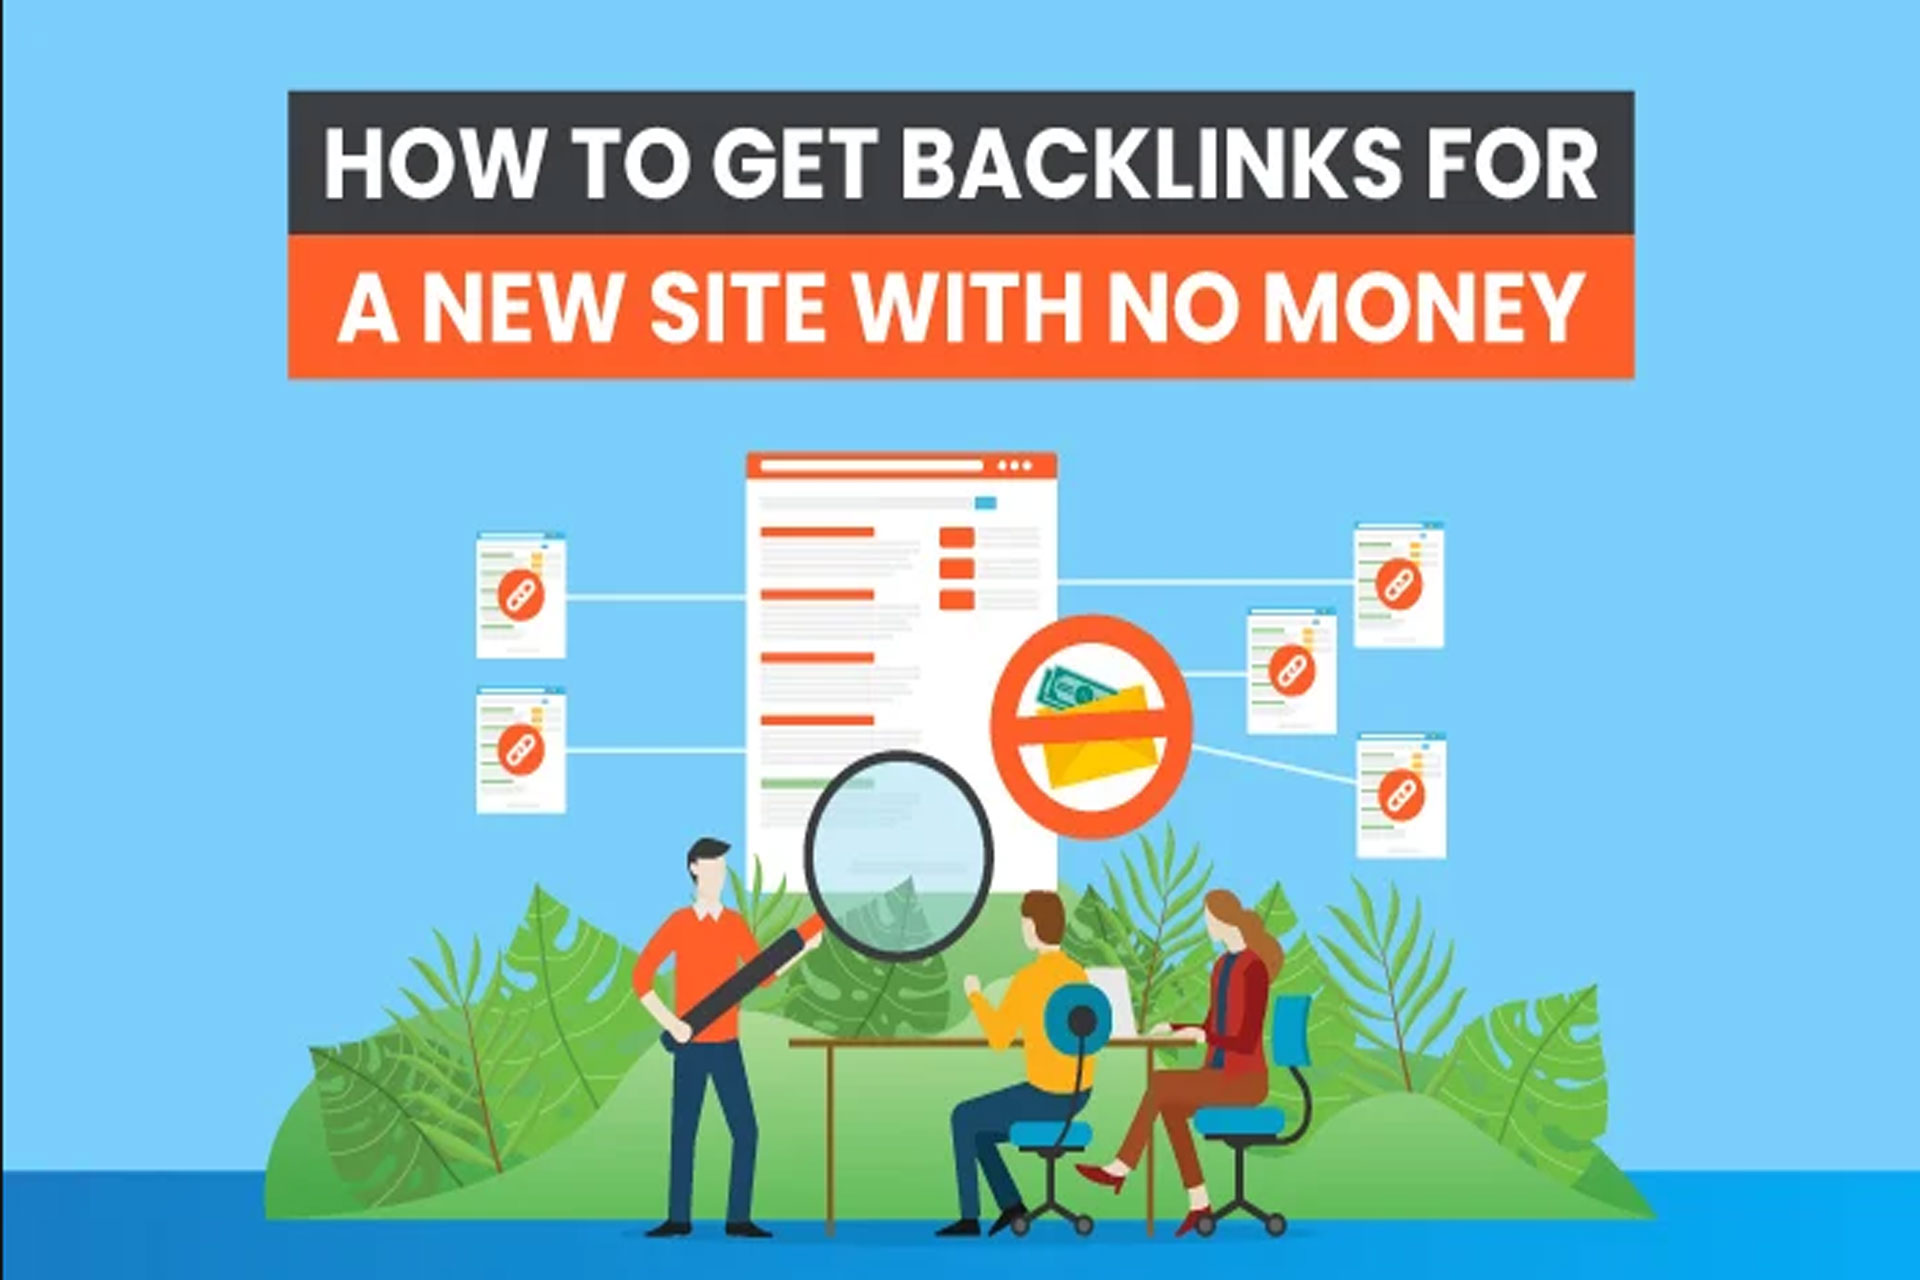 Why backlinks and how to get them?